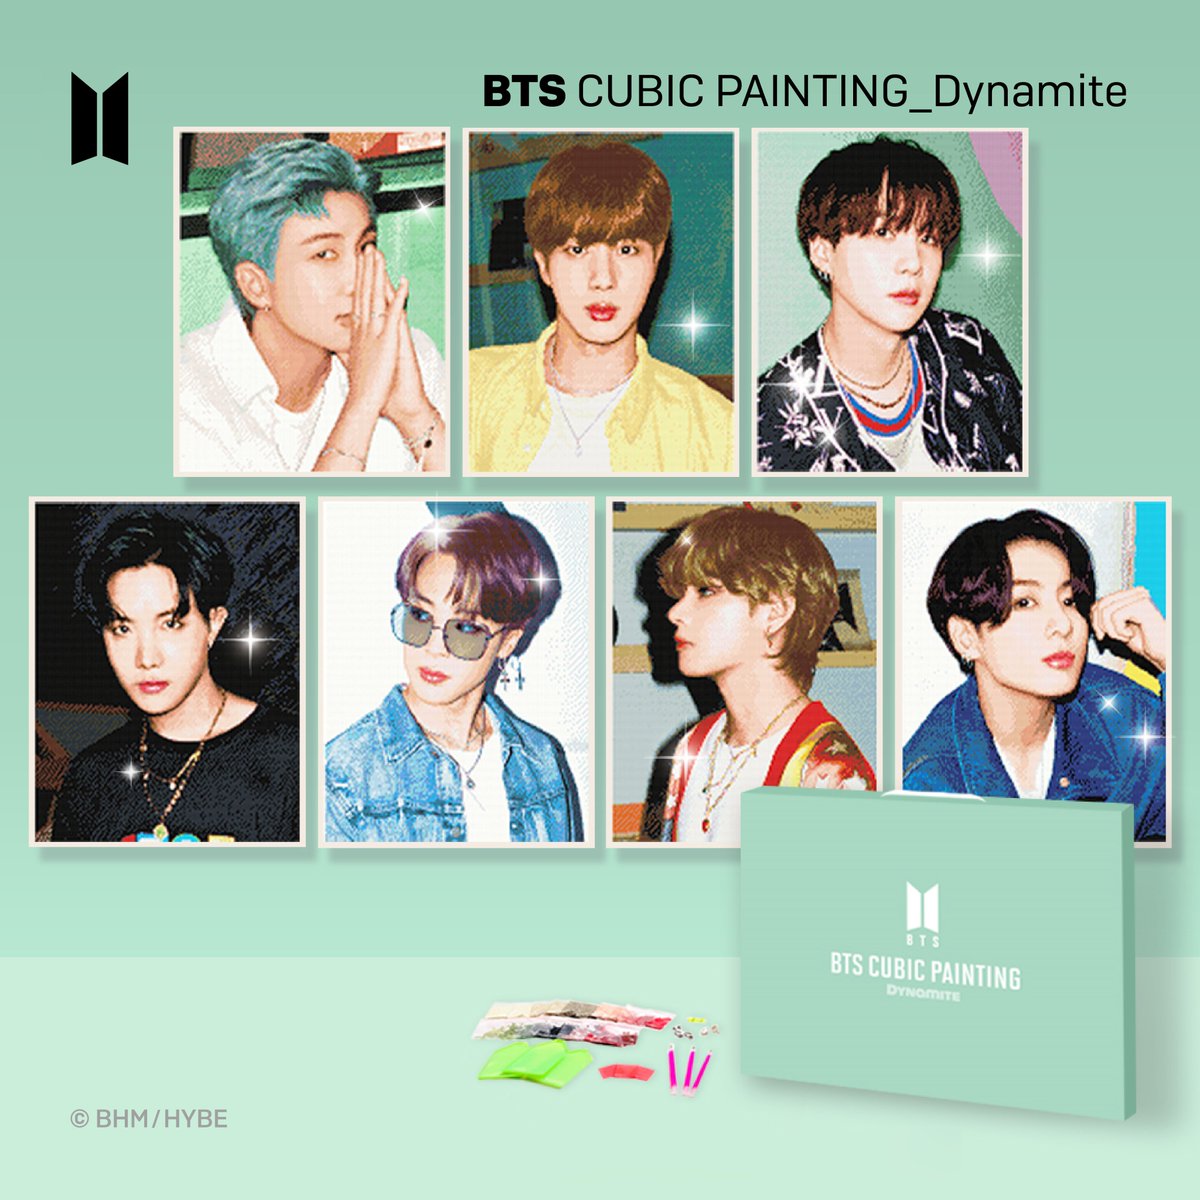 [April 2021] Newly Launched Licensed Products!BTS Dynamite  @ilovepainting__ Cubic Painting available in Japan, Korea and the USA